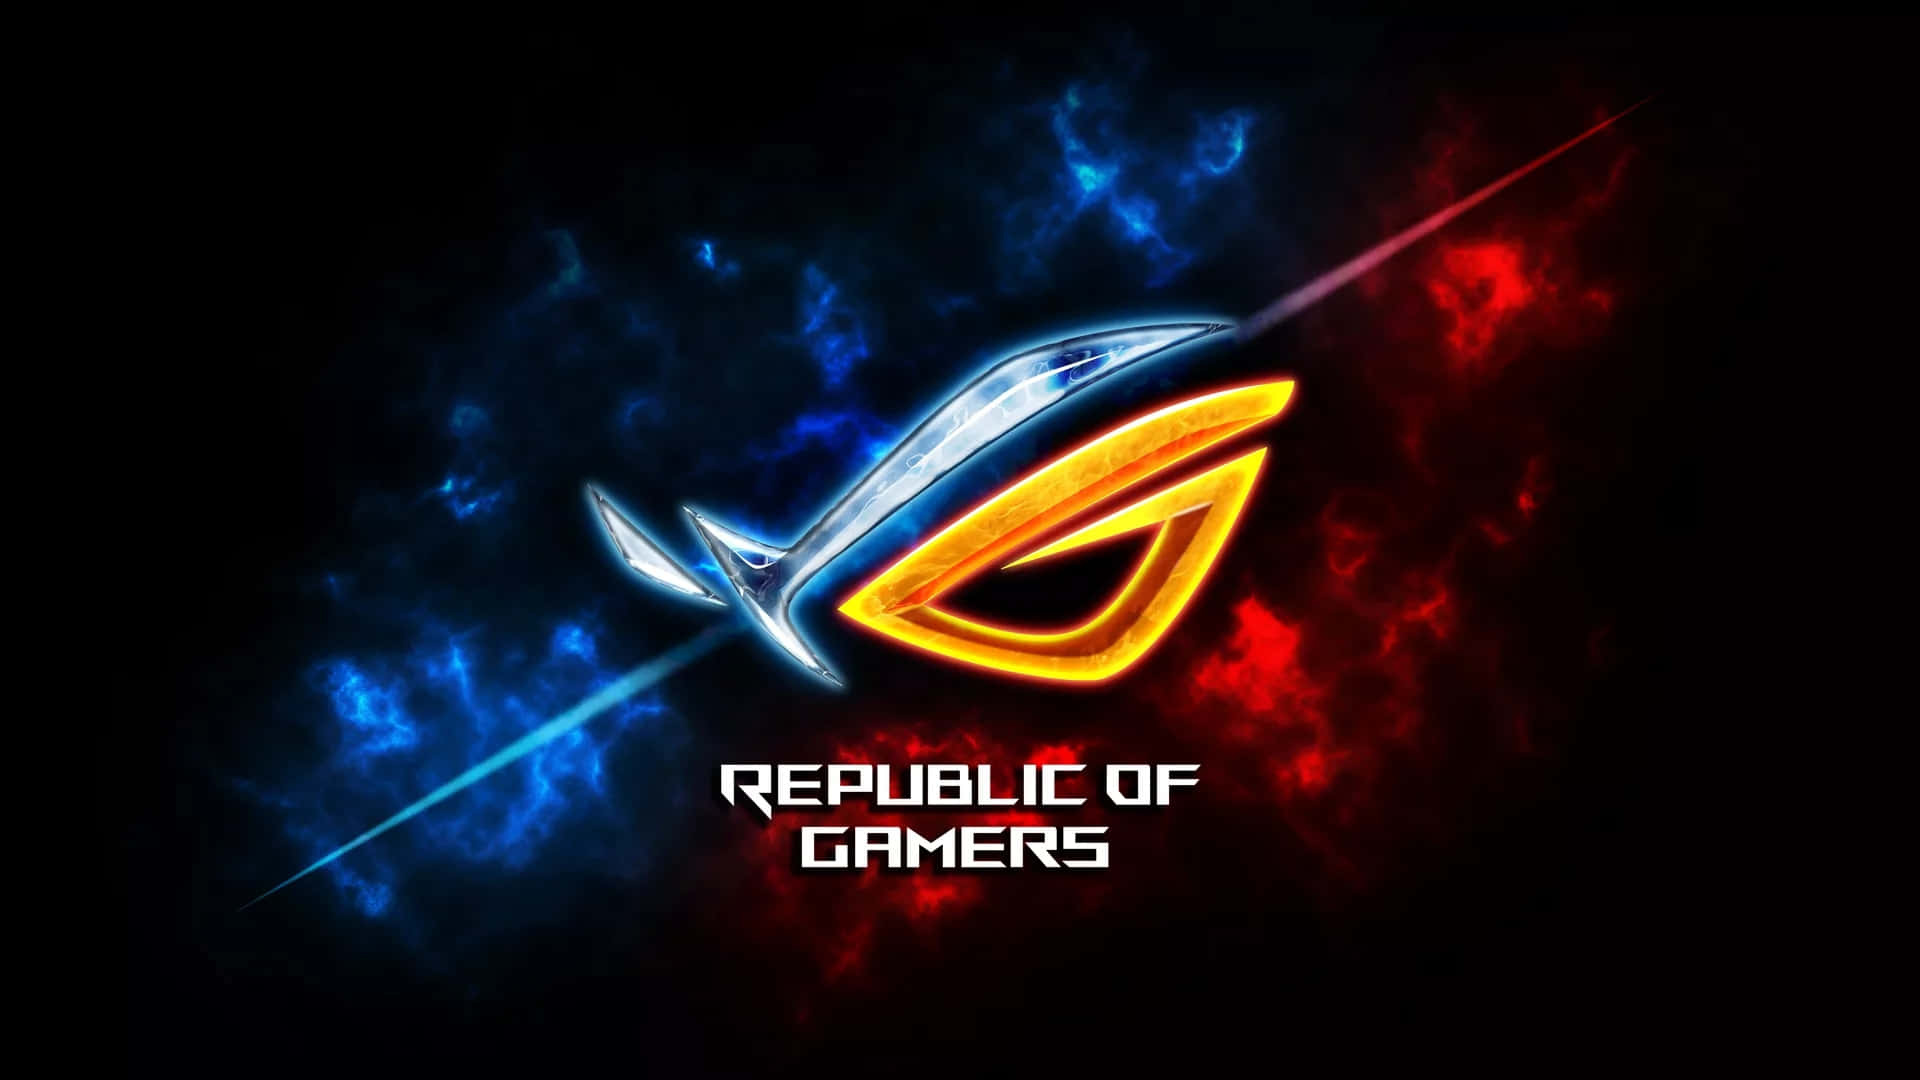 Asus R O G Logowith Red Blue Effects